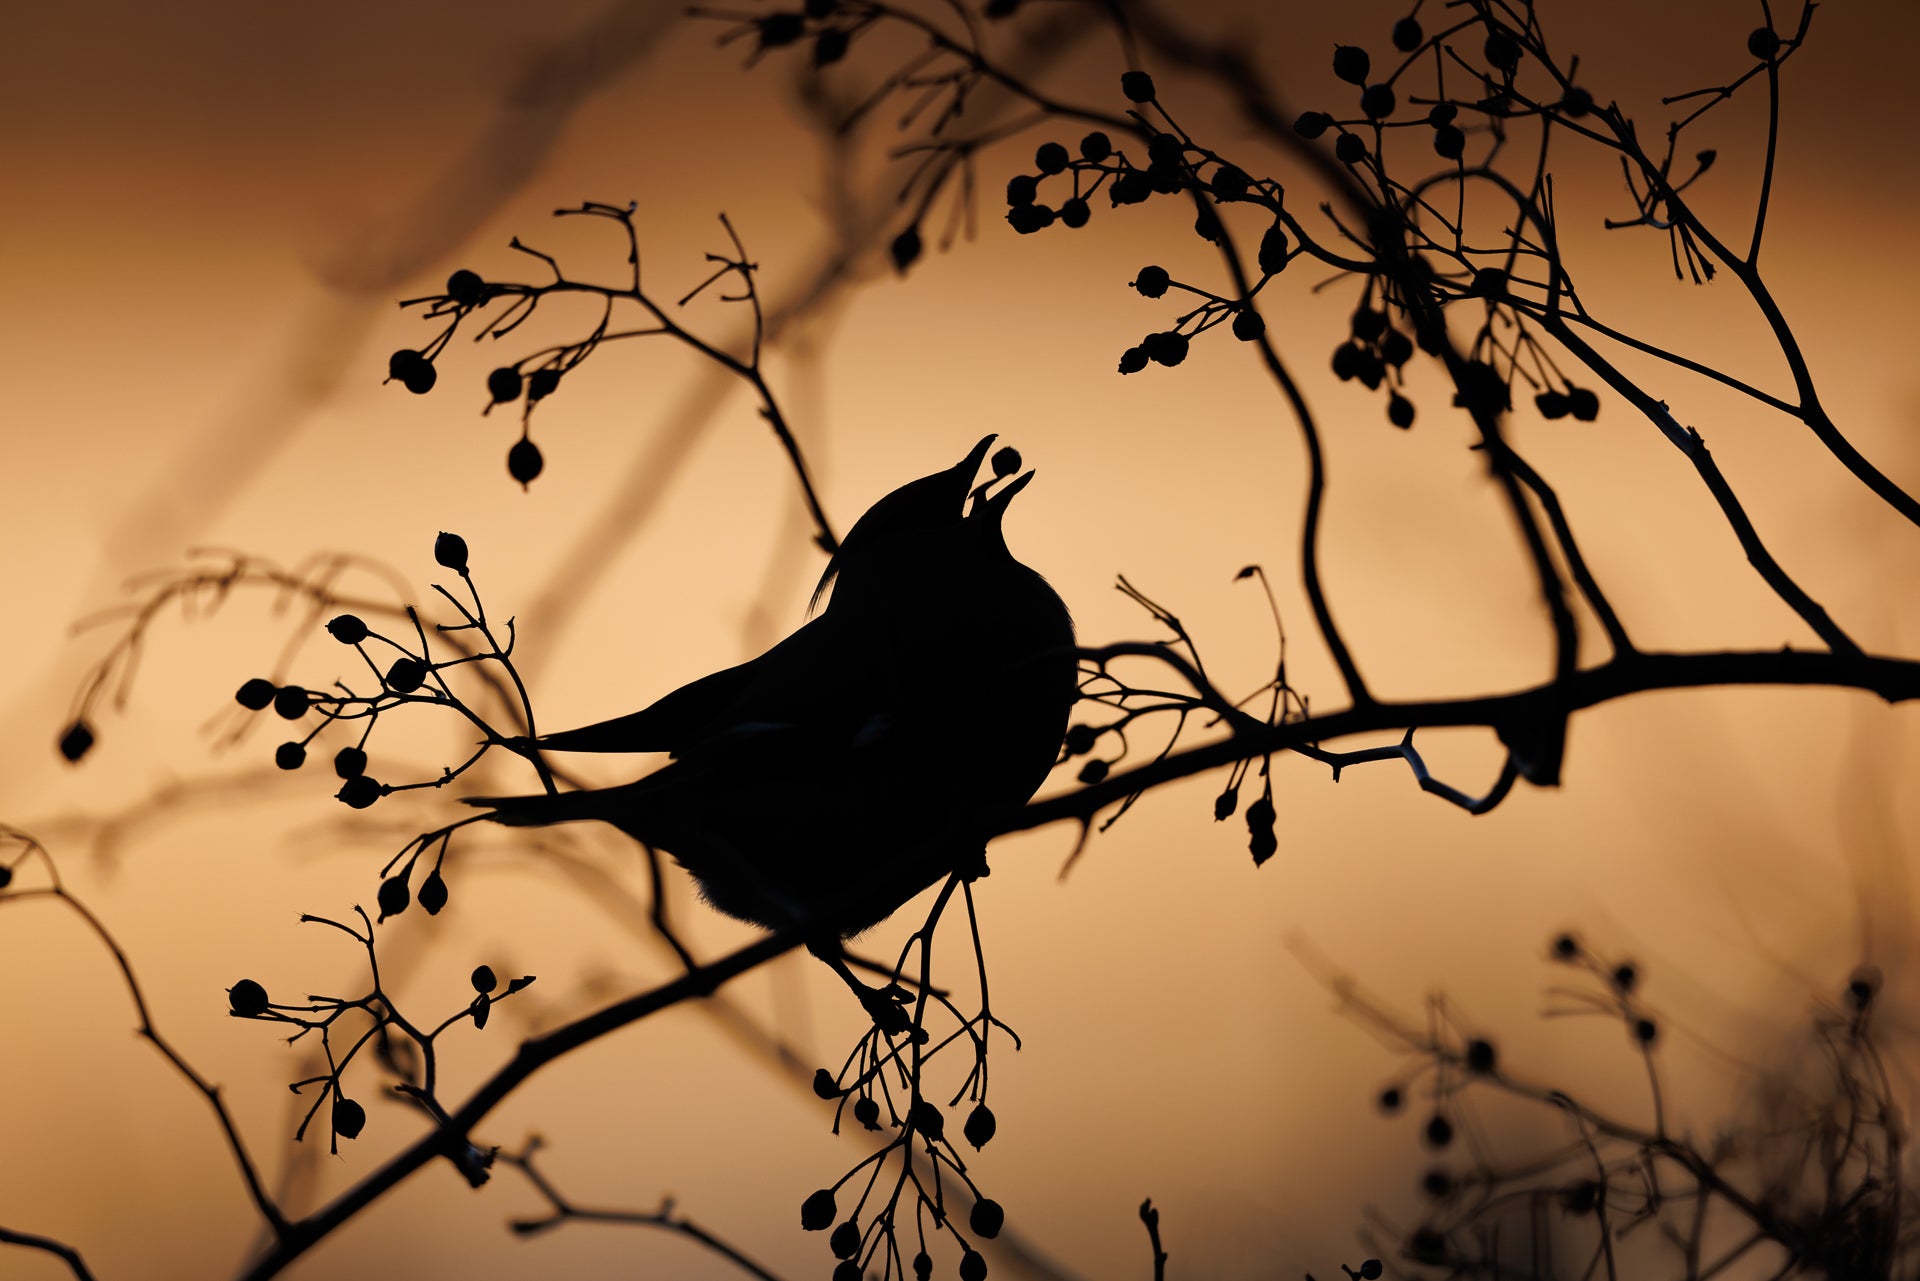 The silhouette of a Bohemian waxwing chomping on some berries. (Photo: Simon d’Entremont)